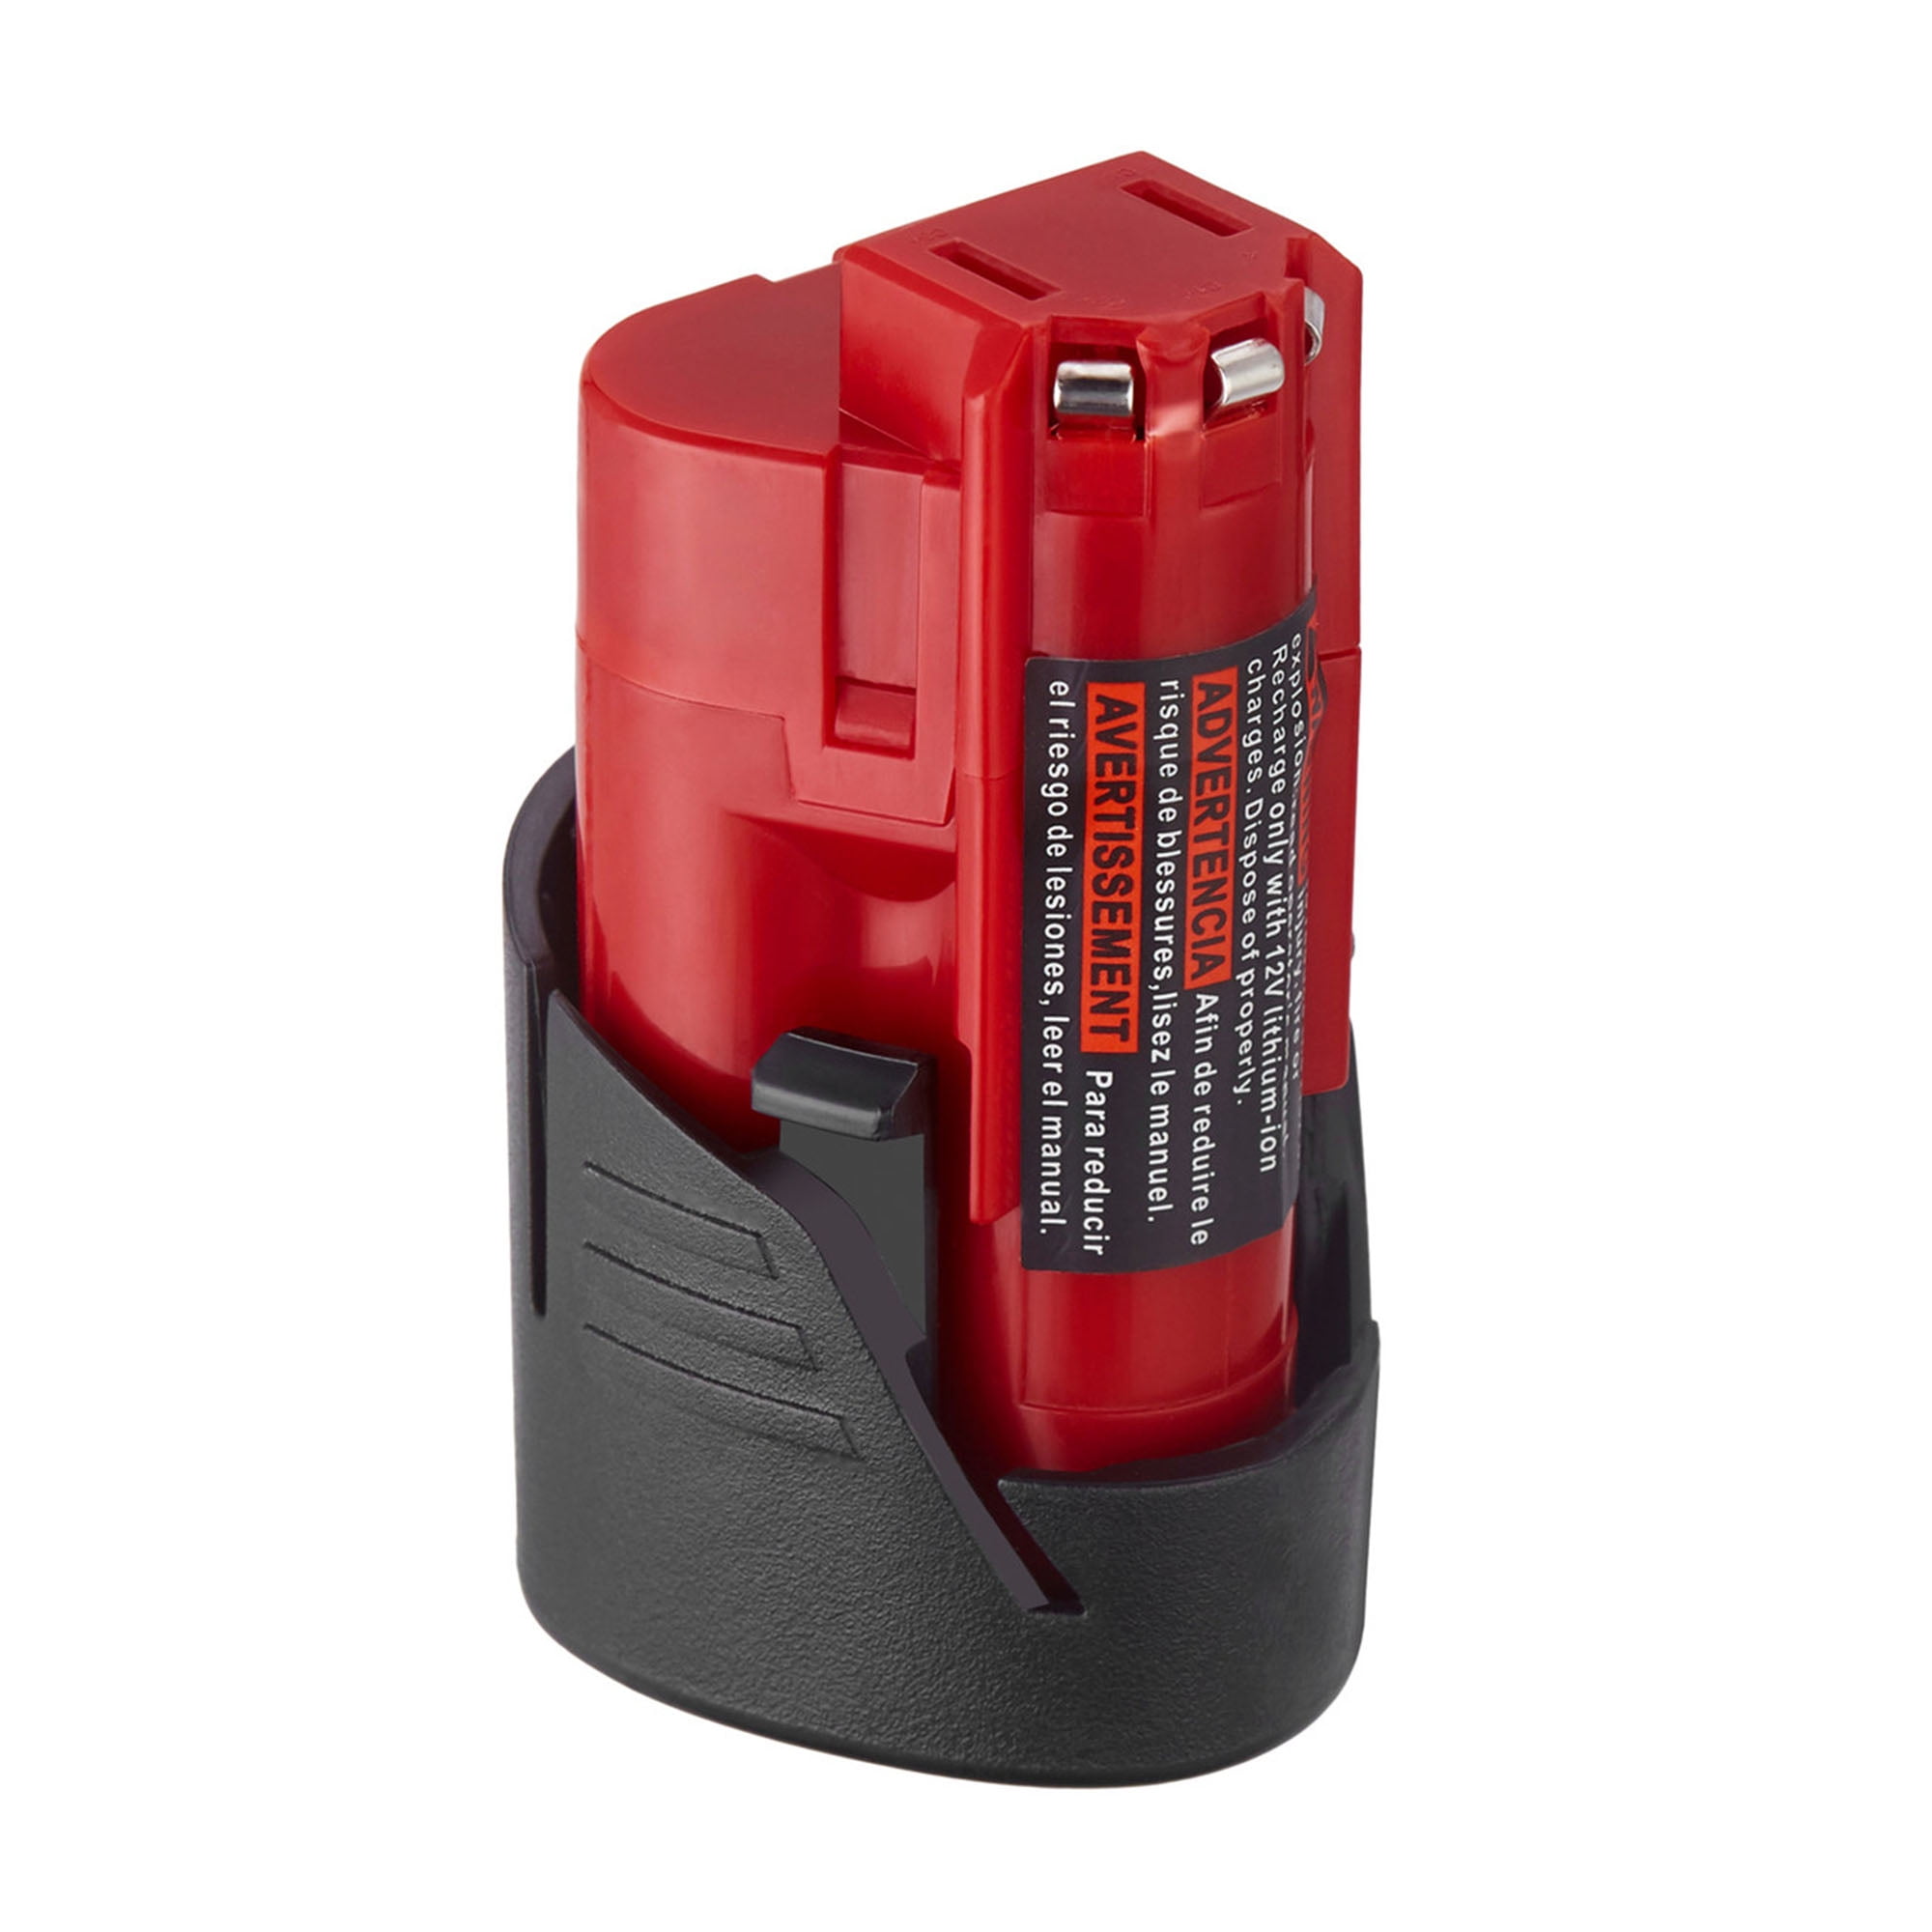 2Pcs 3.0Ah 12V NiCd Battery for MILWAUKEE 48-11-0200 48-11-0140 48-11-0141 Drill 